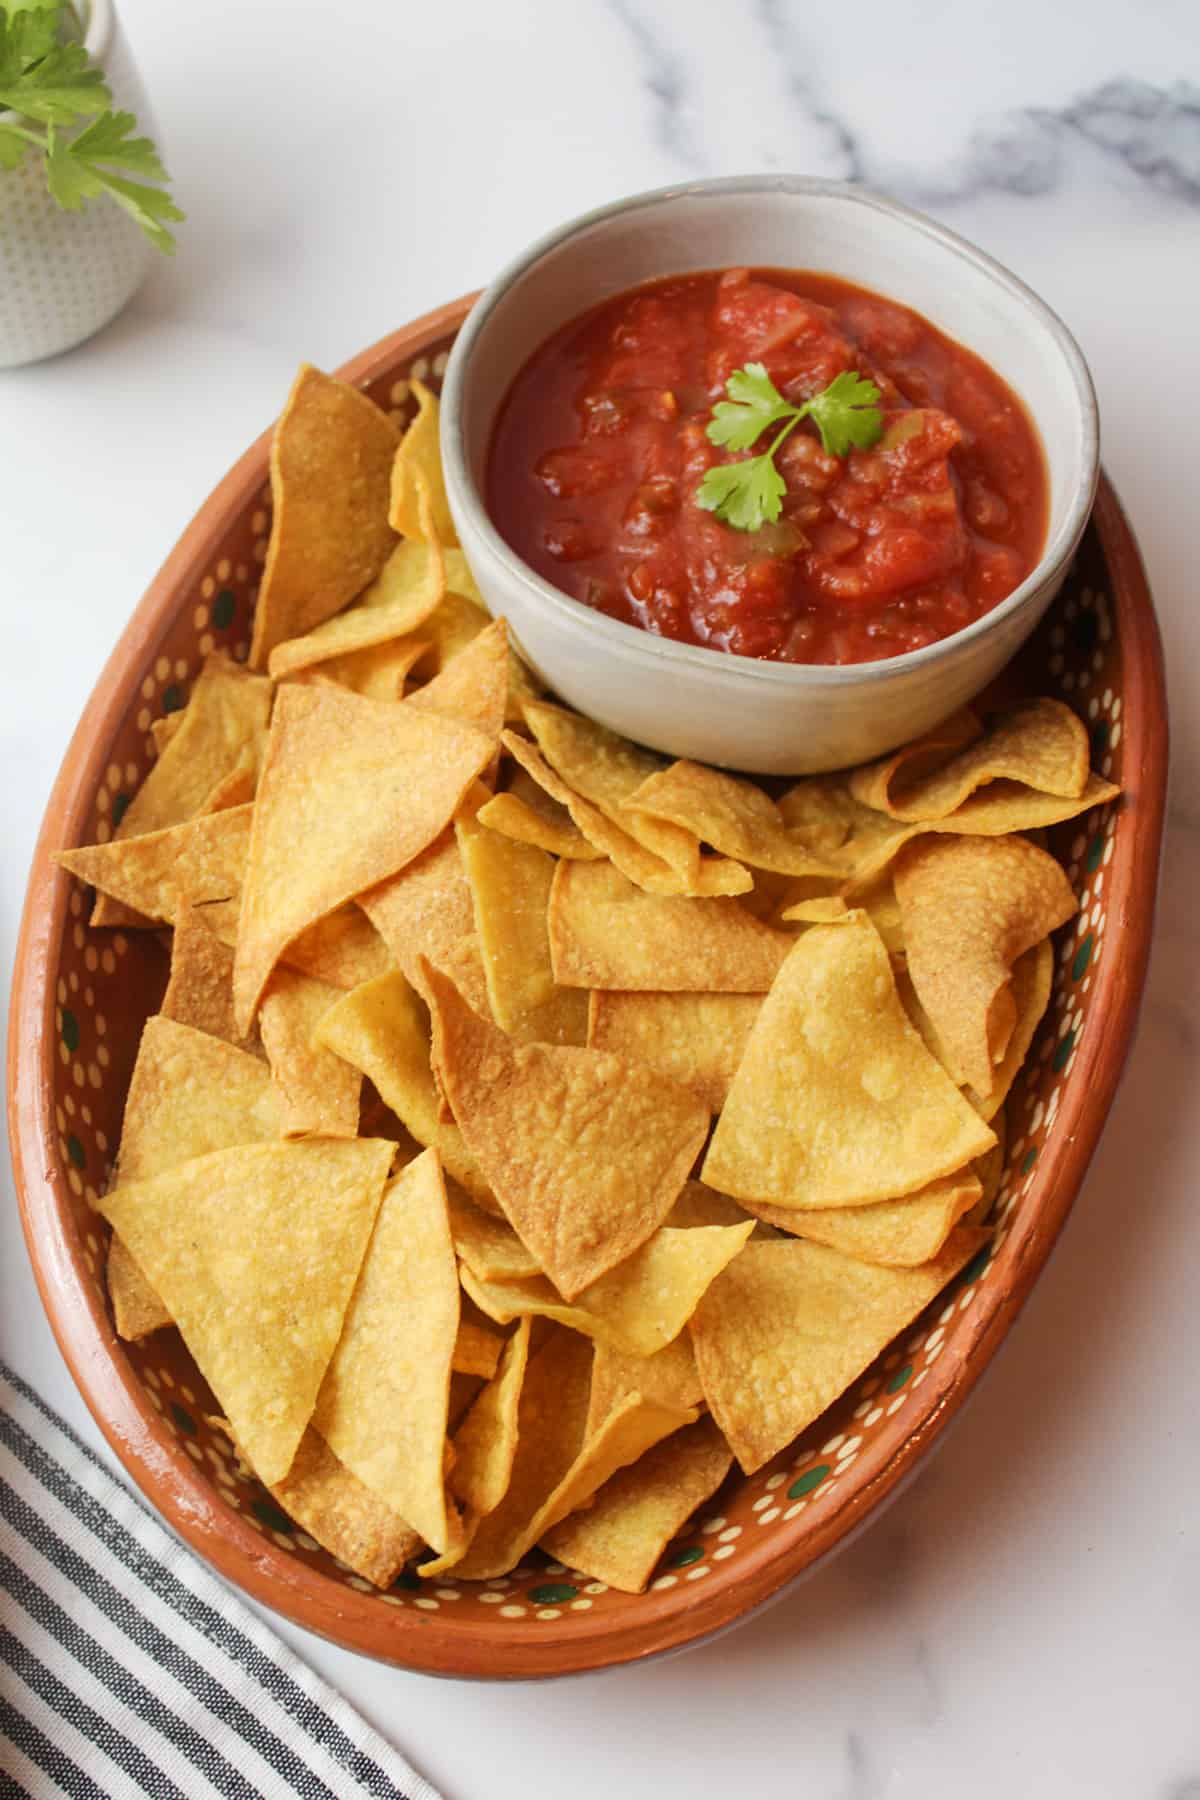 a plate of homemade tortilla chips and a bowl of red salsa.